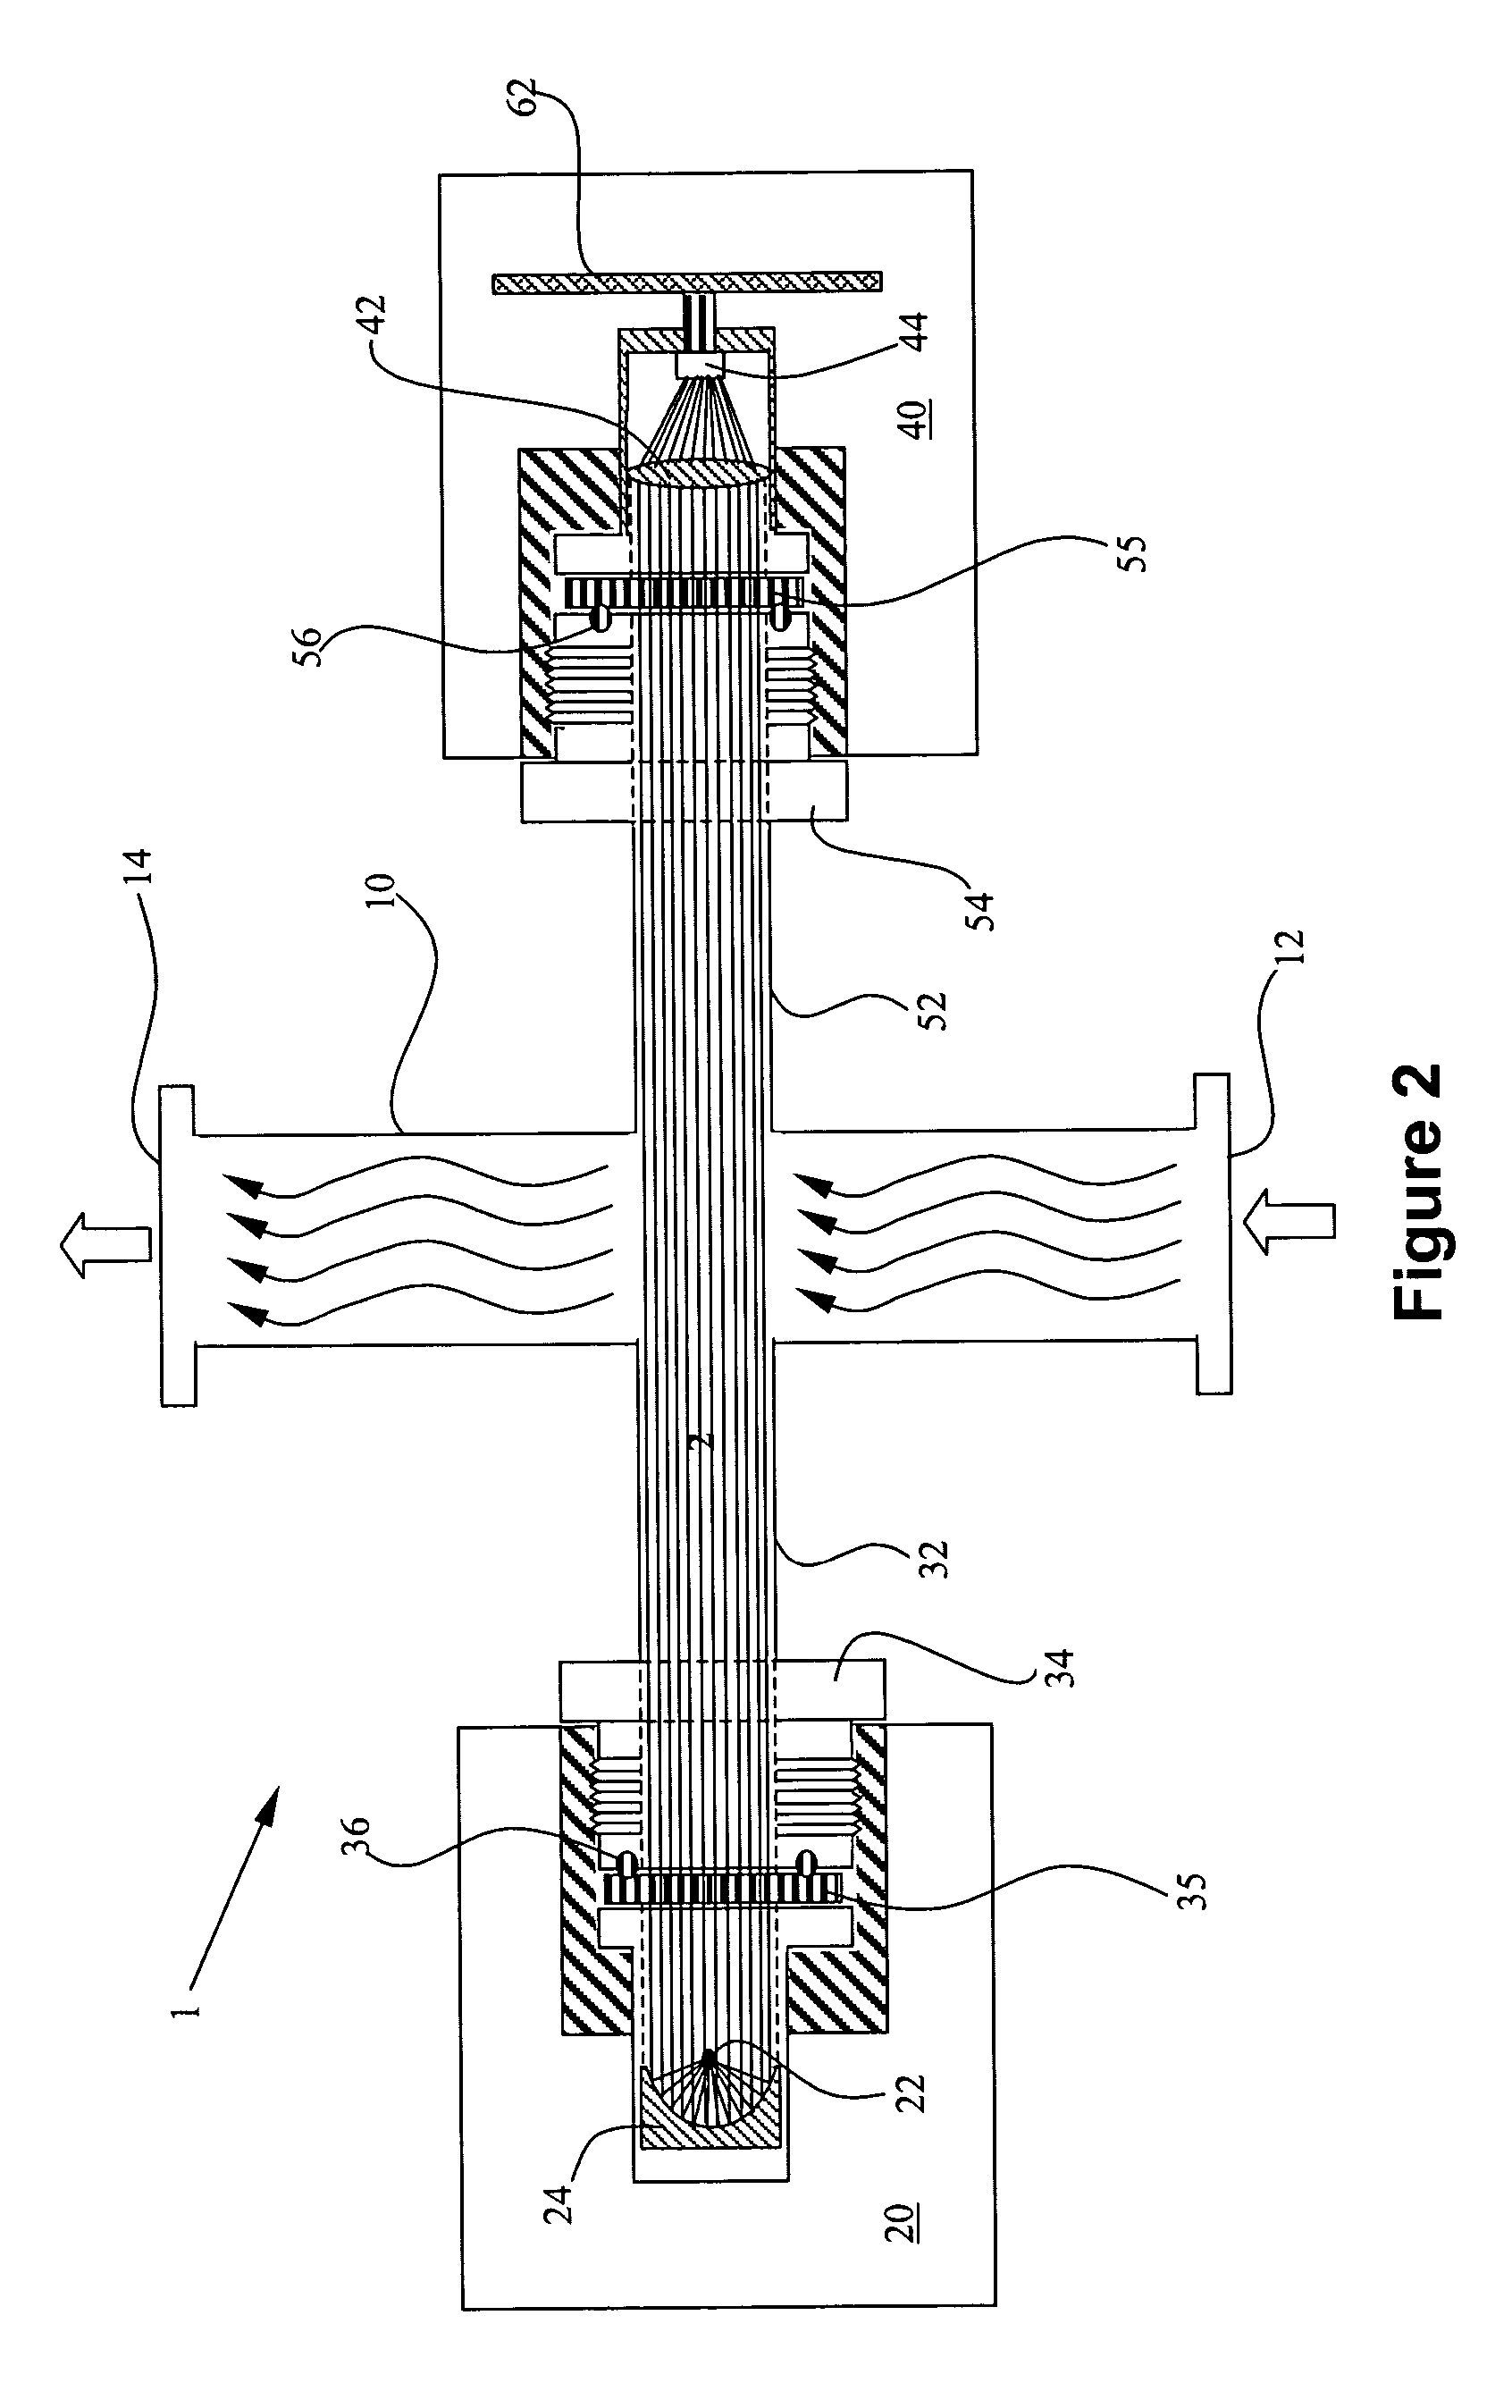 Monitoring system comprising infrared thermopile detetor